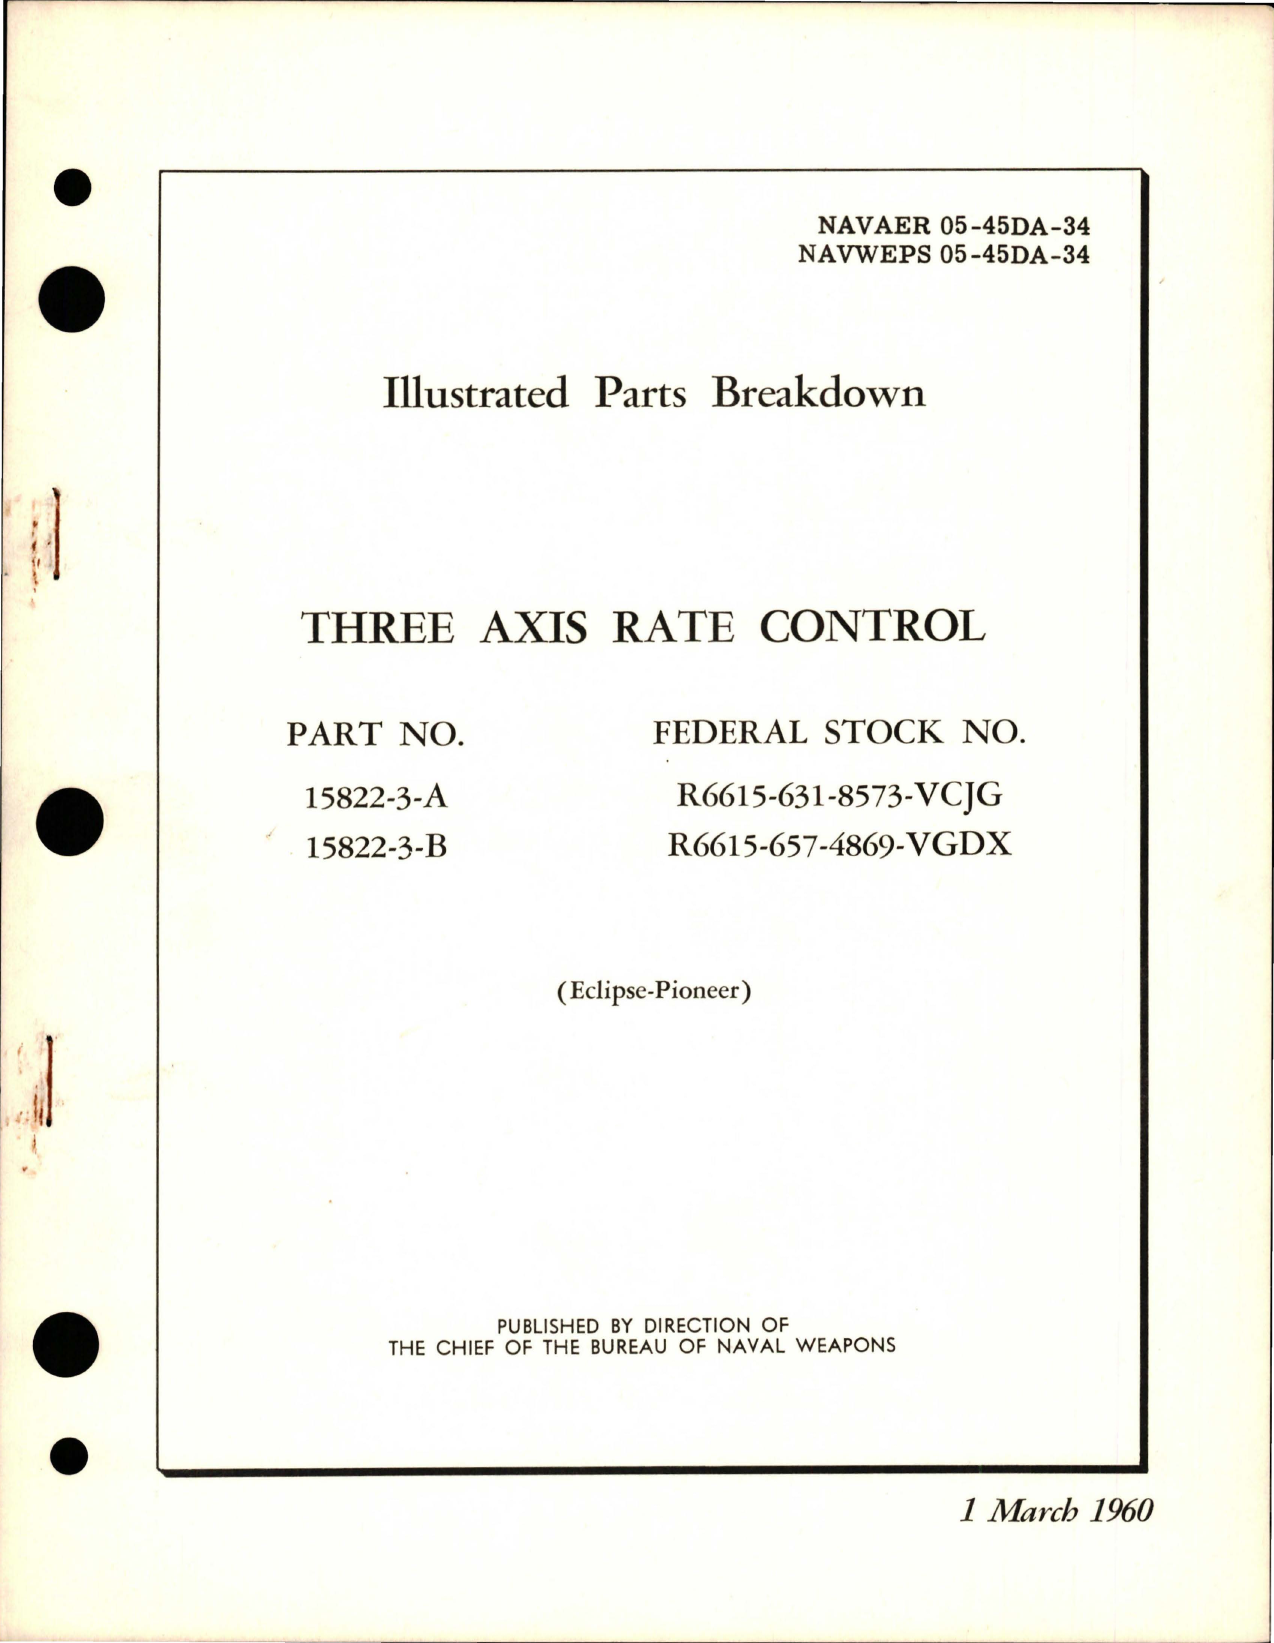 Sample page 1 from AirCorps Library document: Illustrated Parts Breakdown for Three Axis Rate Control - Parts 15822-3-A and 15822-3-B